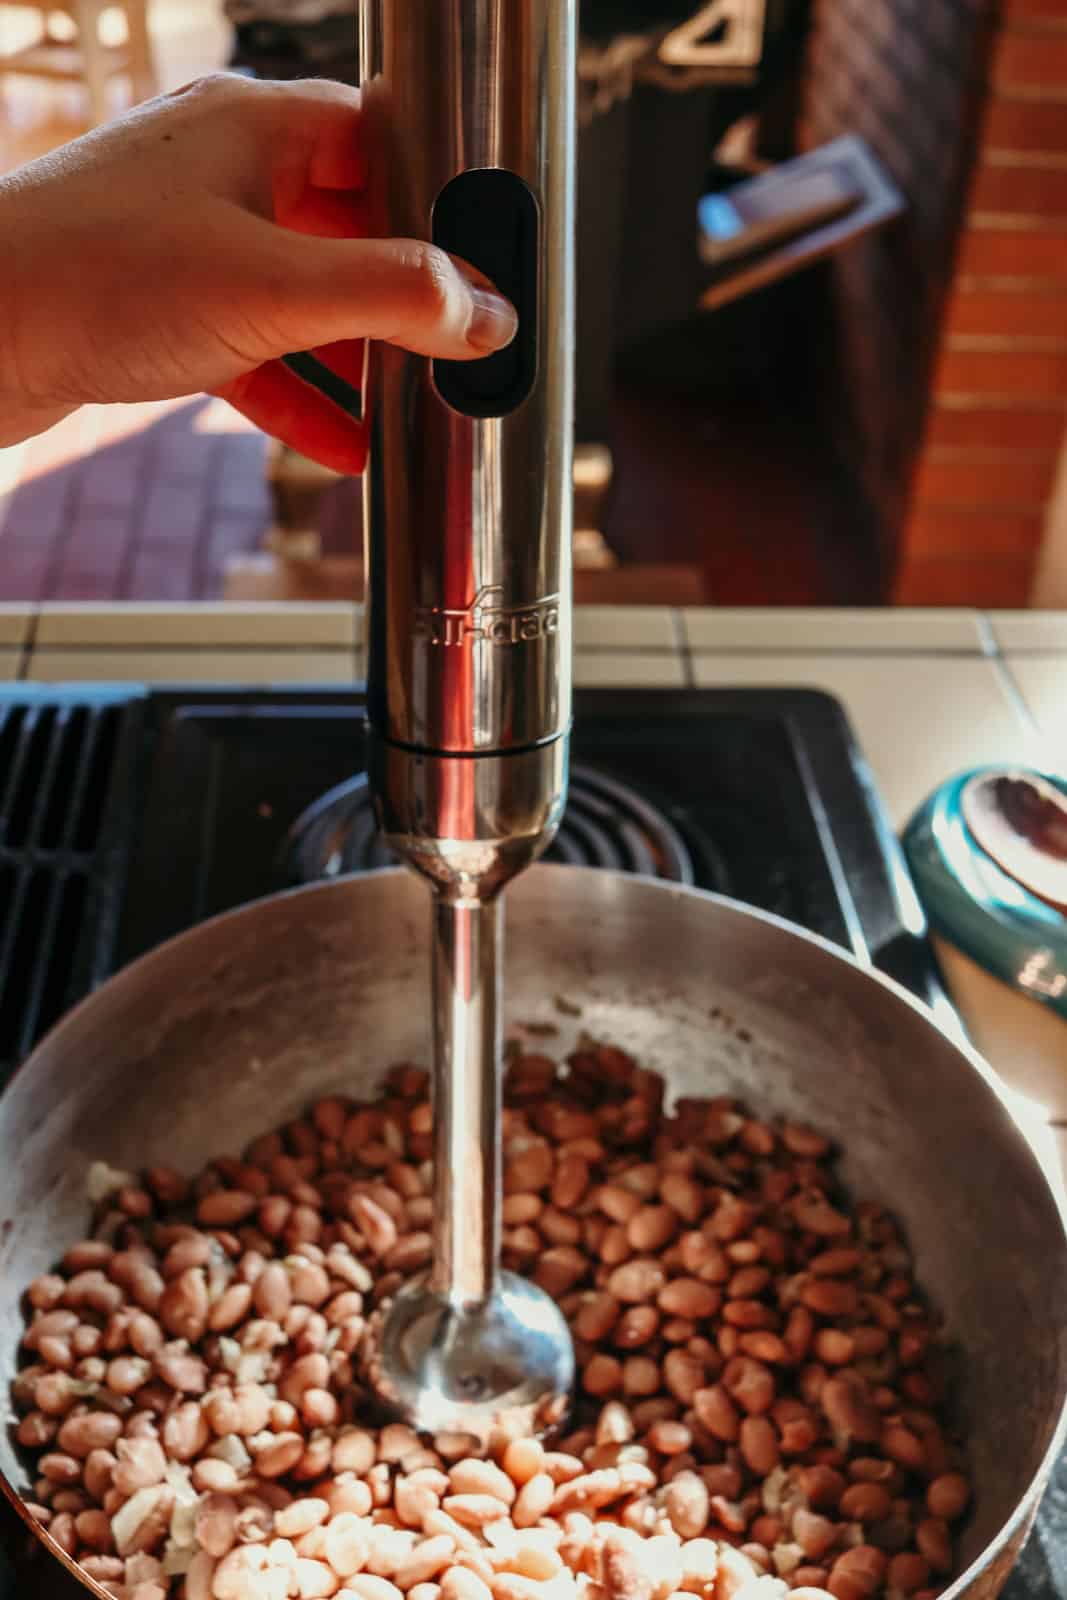 An immersion blender being used to make refried beans in a copper saucier